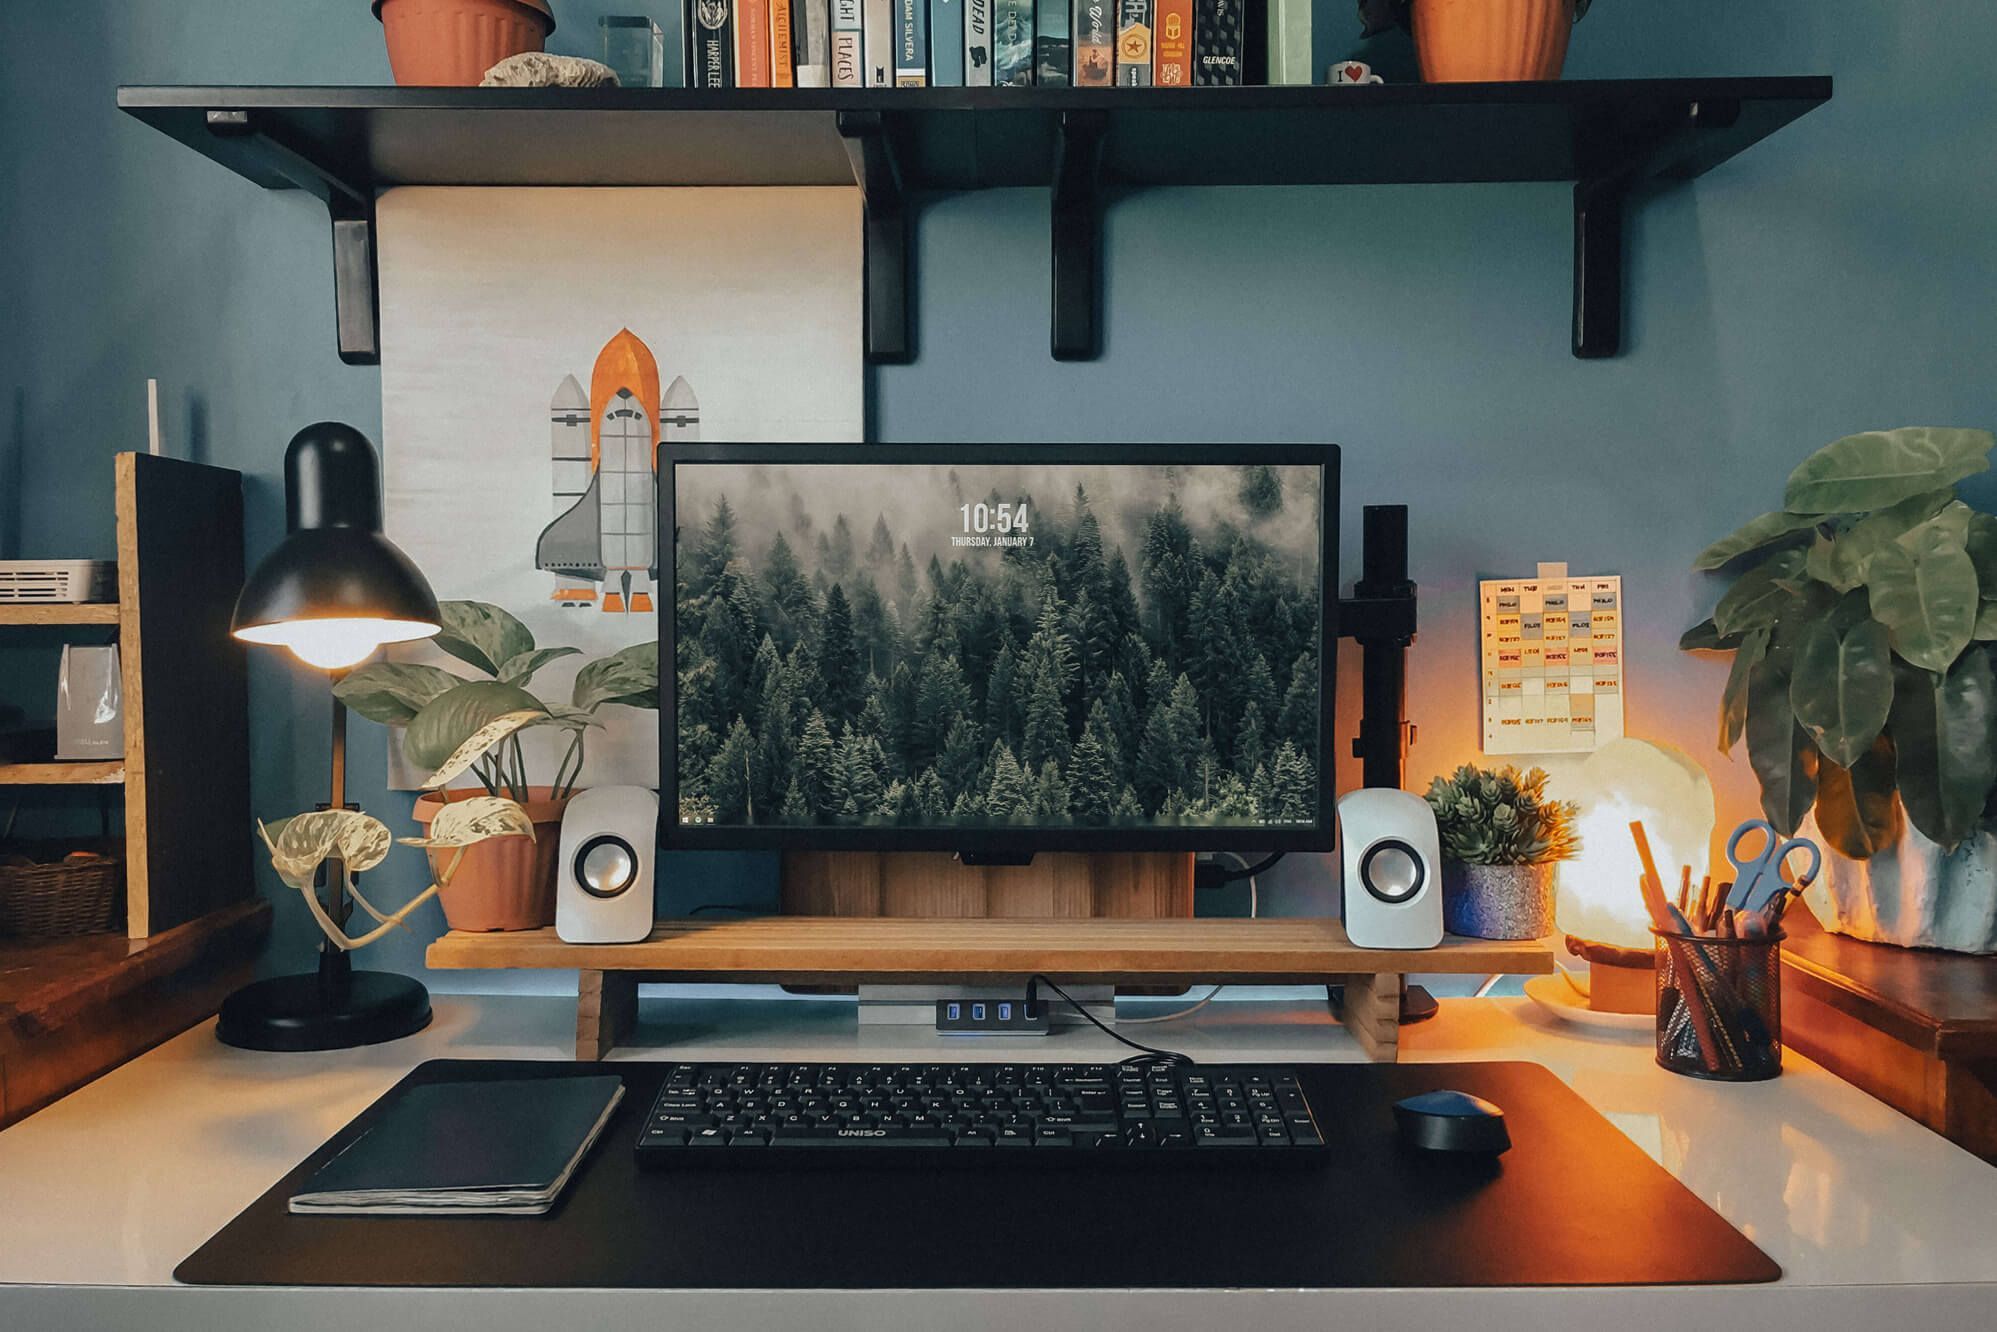 30 Most Relaxing Desk Setup Ideas You Should Check